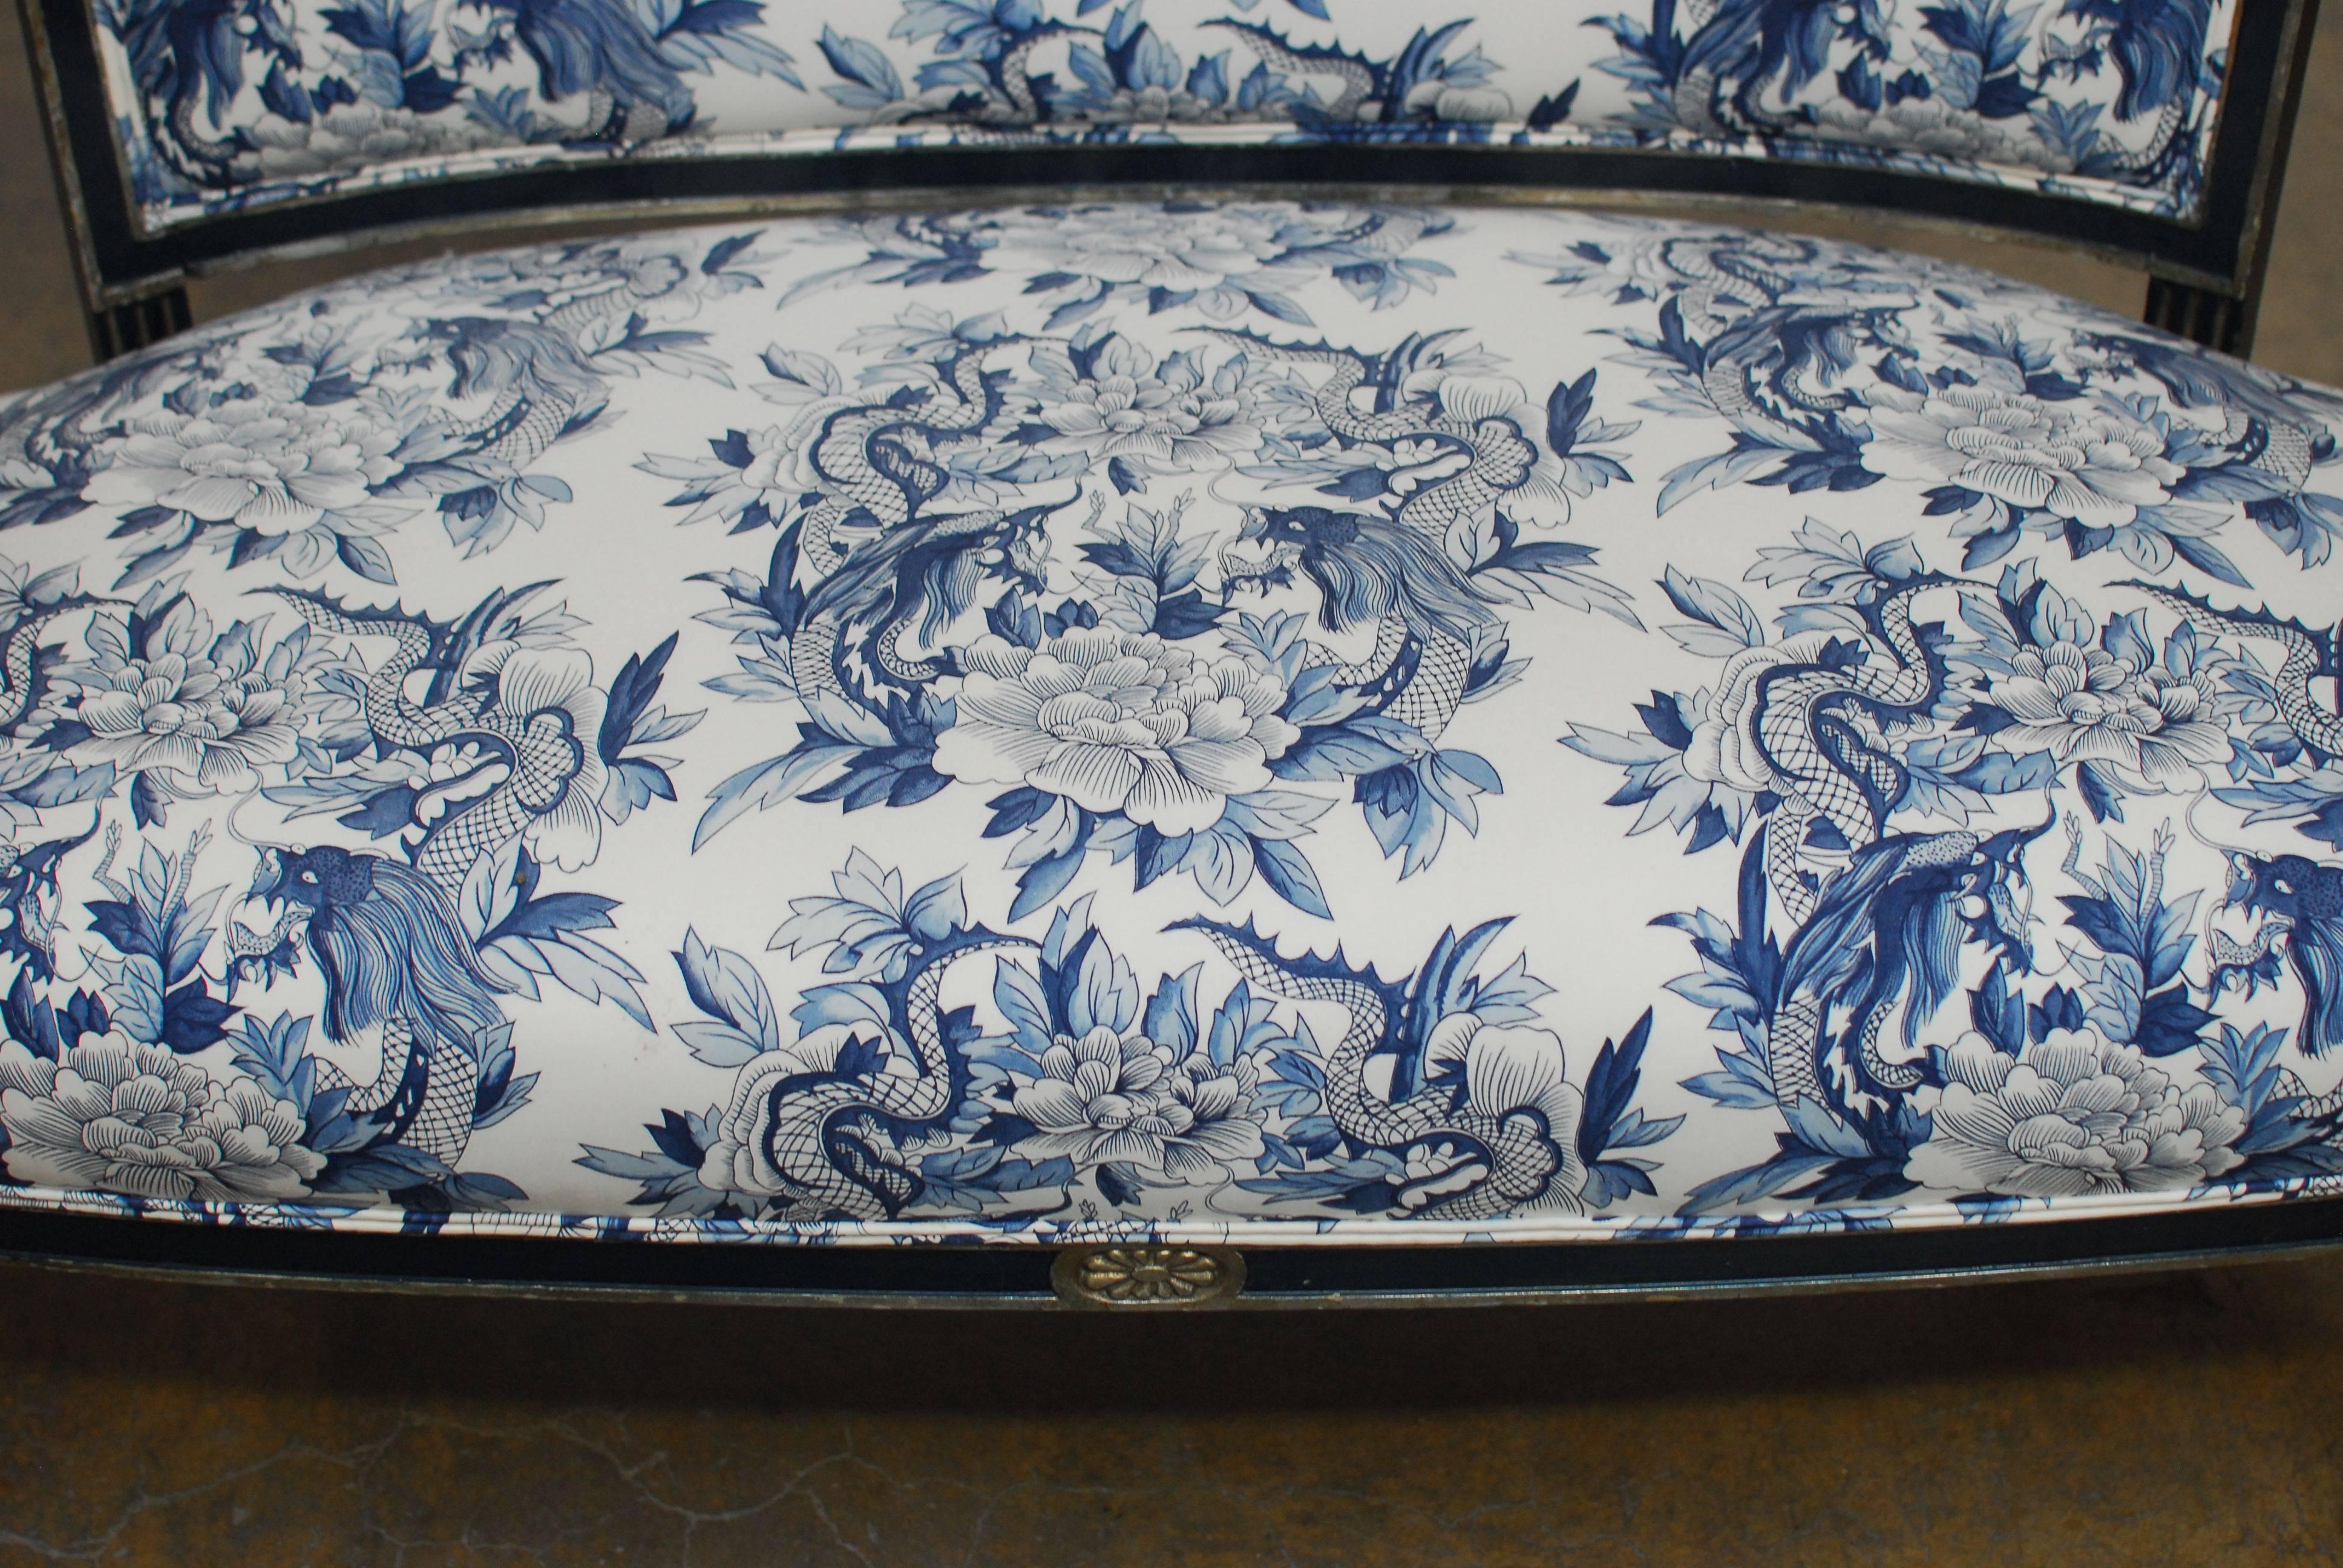 Striking French Directoire style settee finished in a dark royal blue frame with silver trim and banding. Featuring a Ralph Lauren toile chinoiserie blue and white upholstery with dragon and foliate decorations and a double welt border. This settee